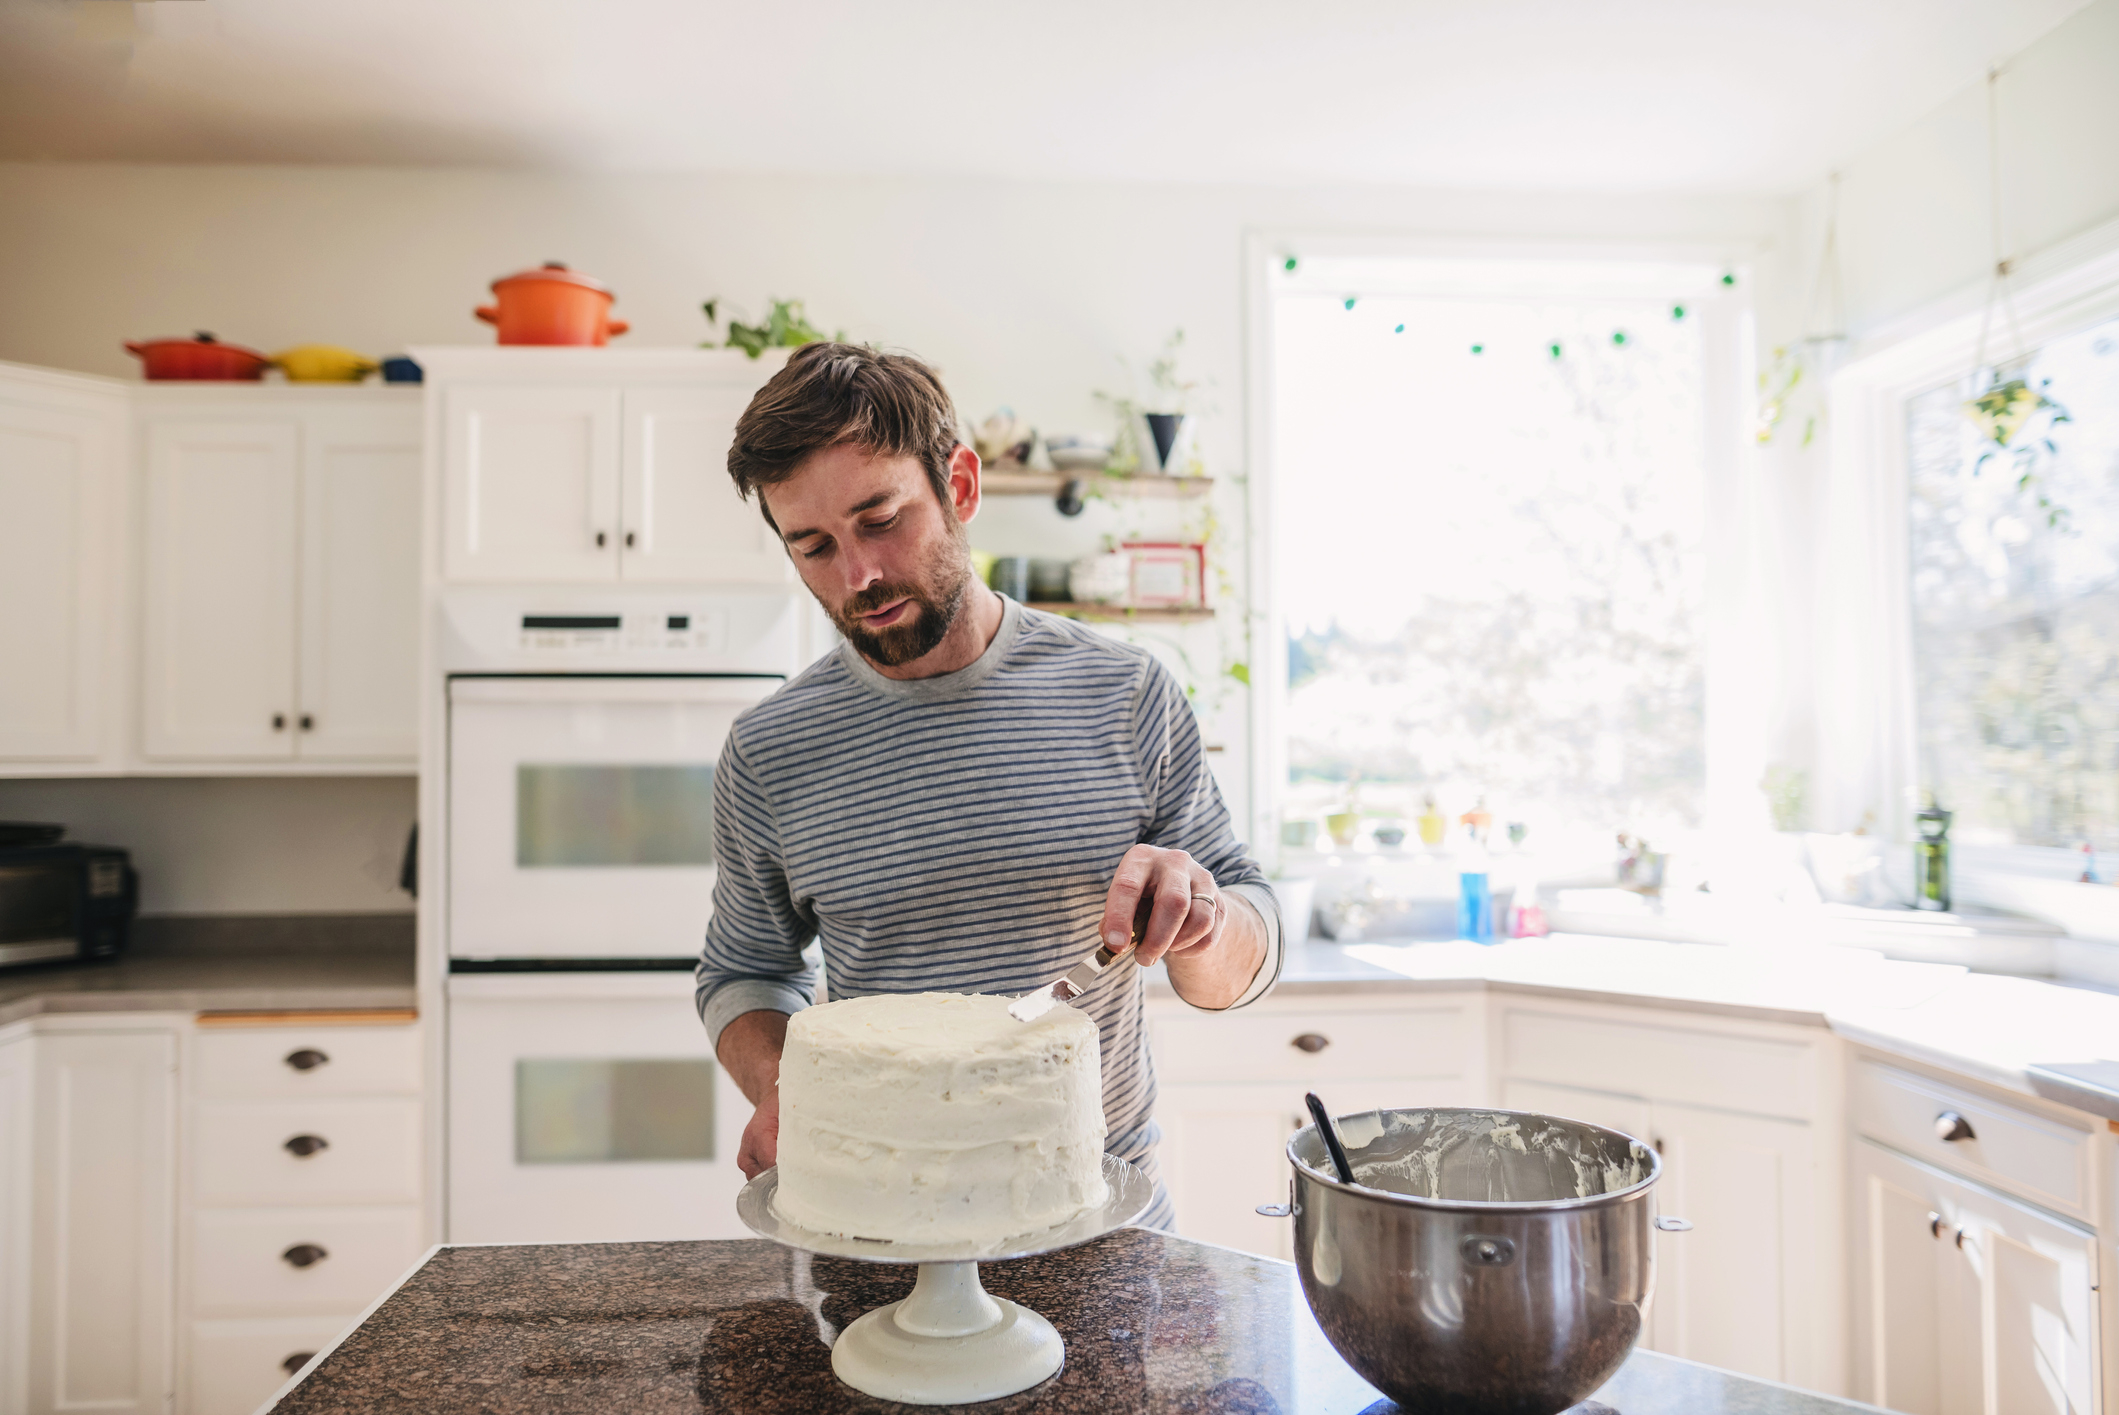 A man is decorating a cake in a kitchen